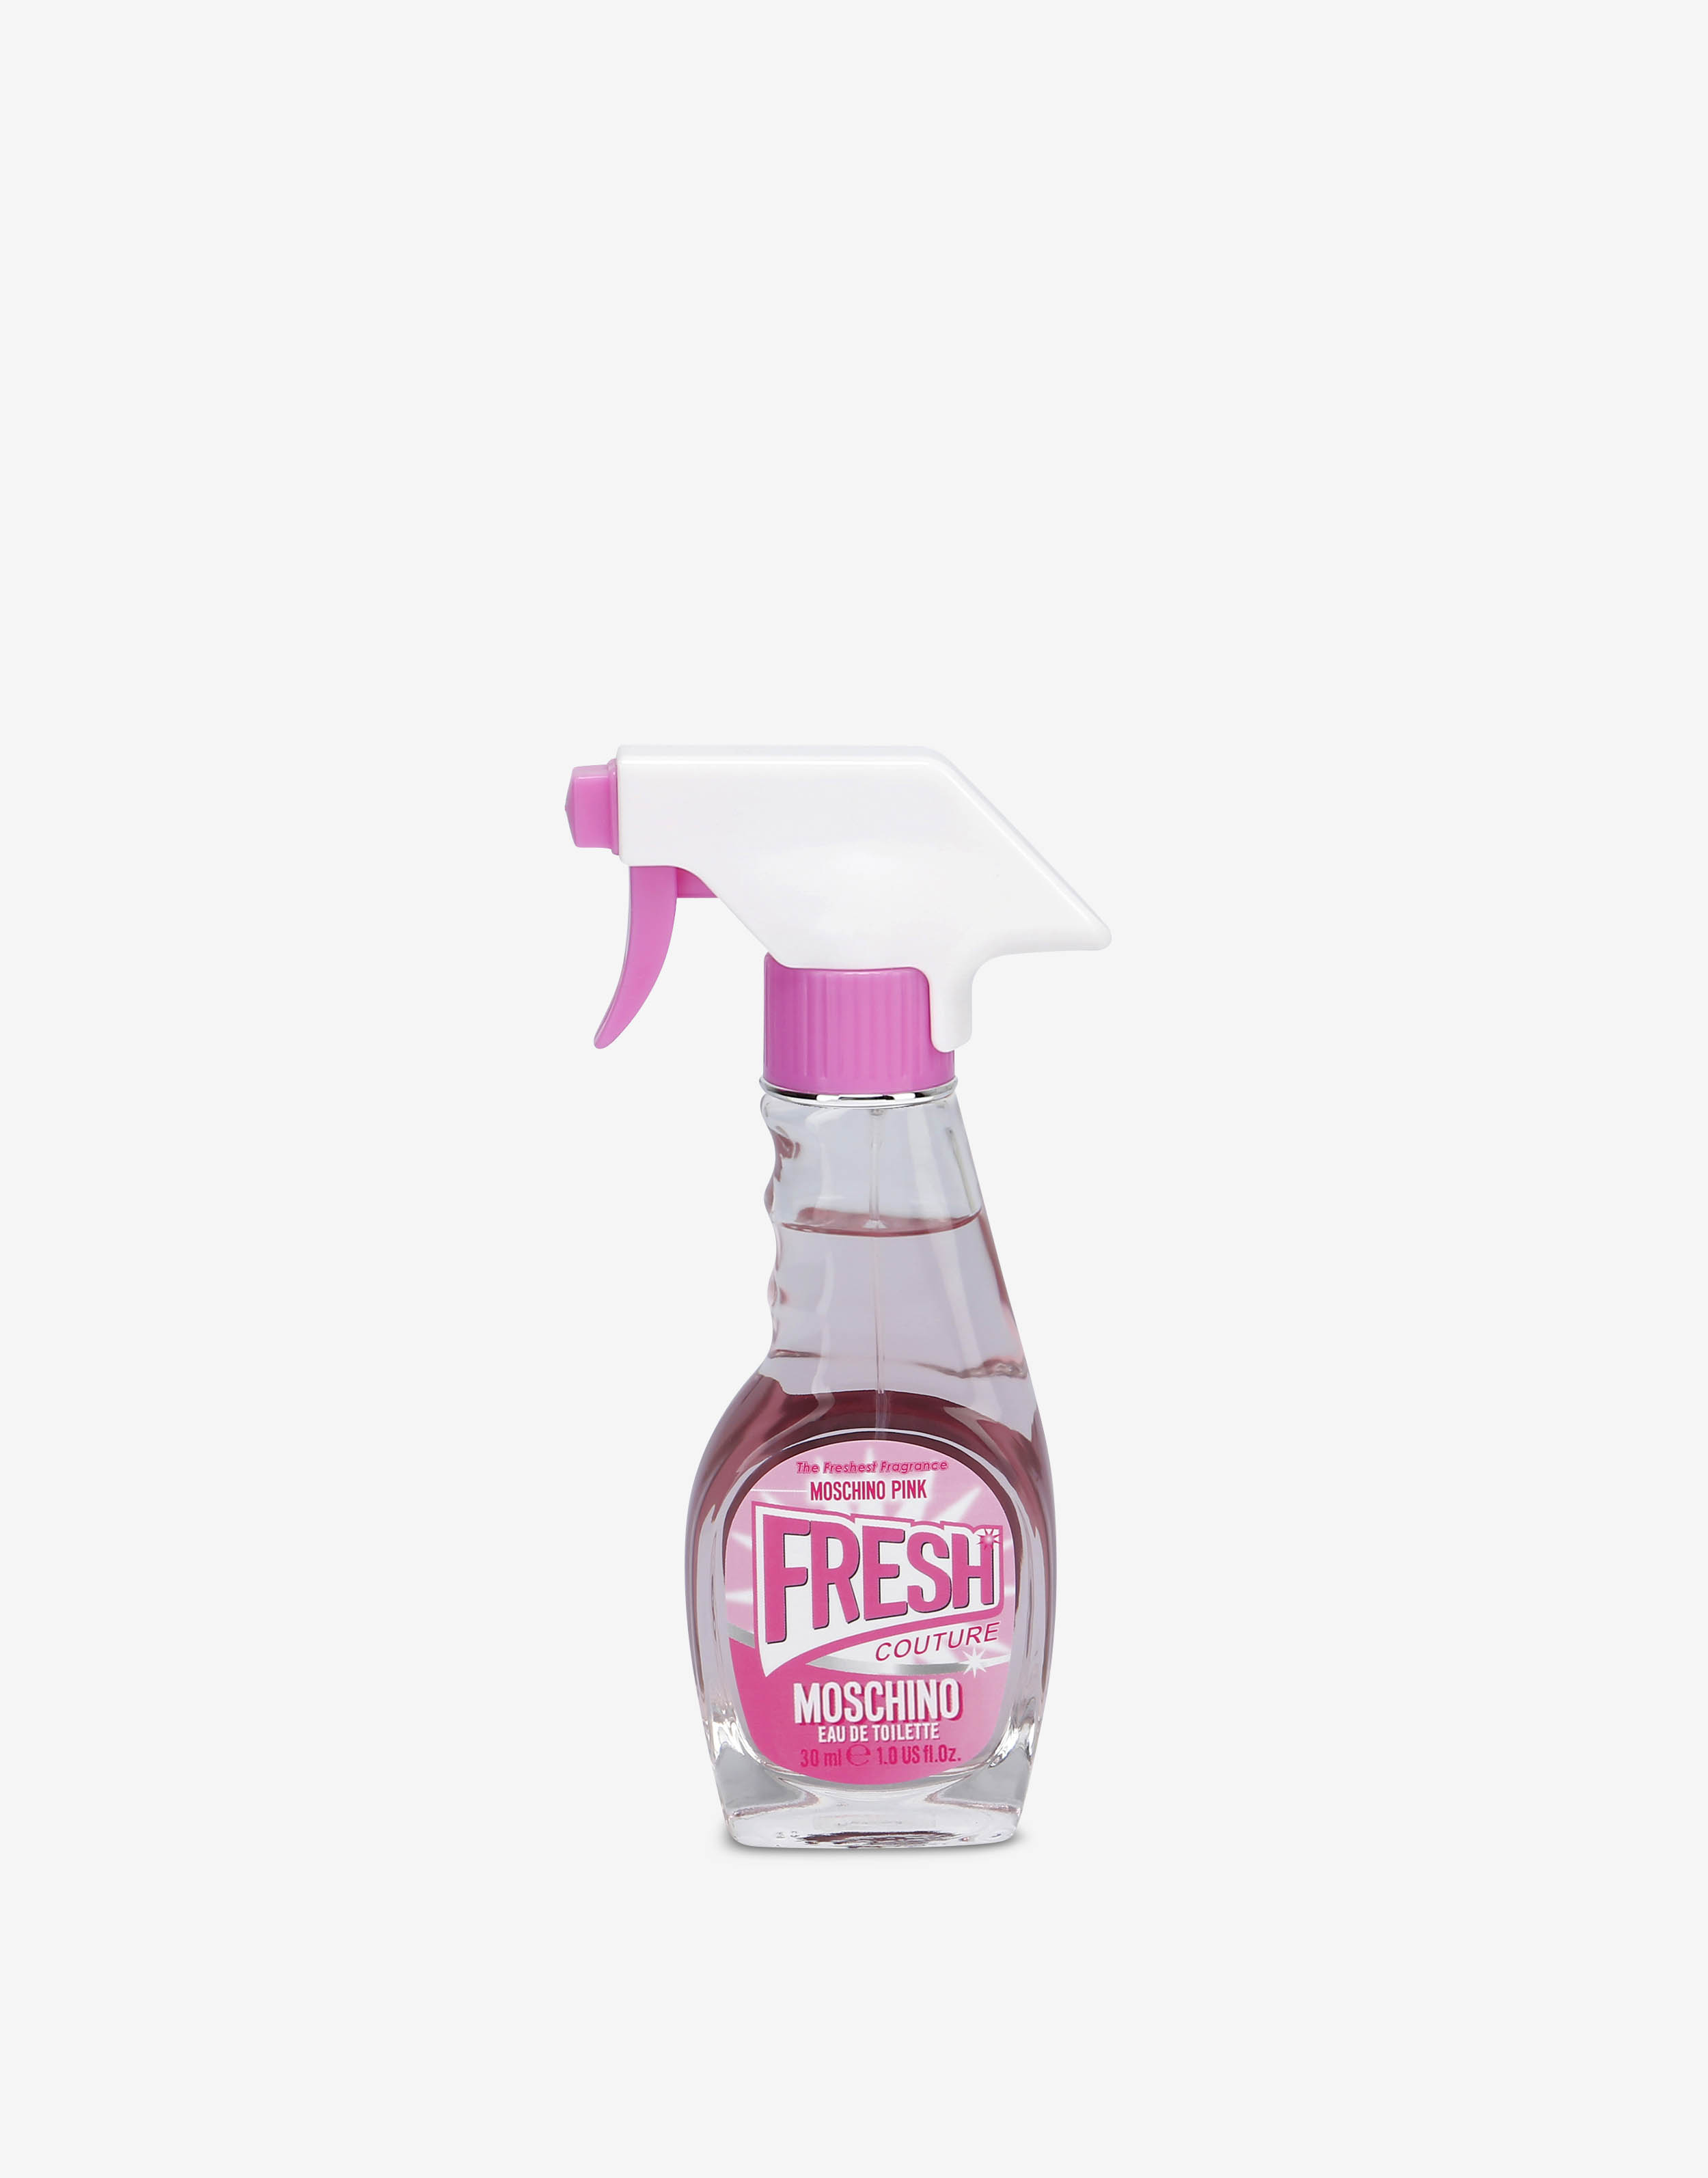 Moschino Pink Fresh Couture by Moschino for Women - 3.4 oz EDT Spray 